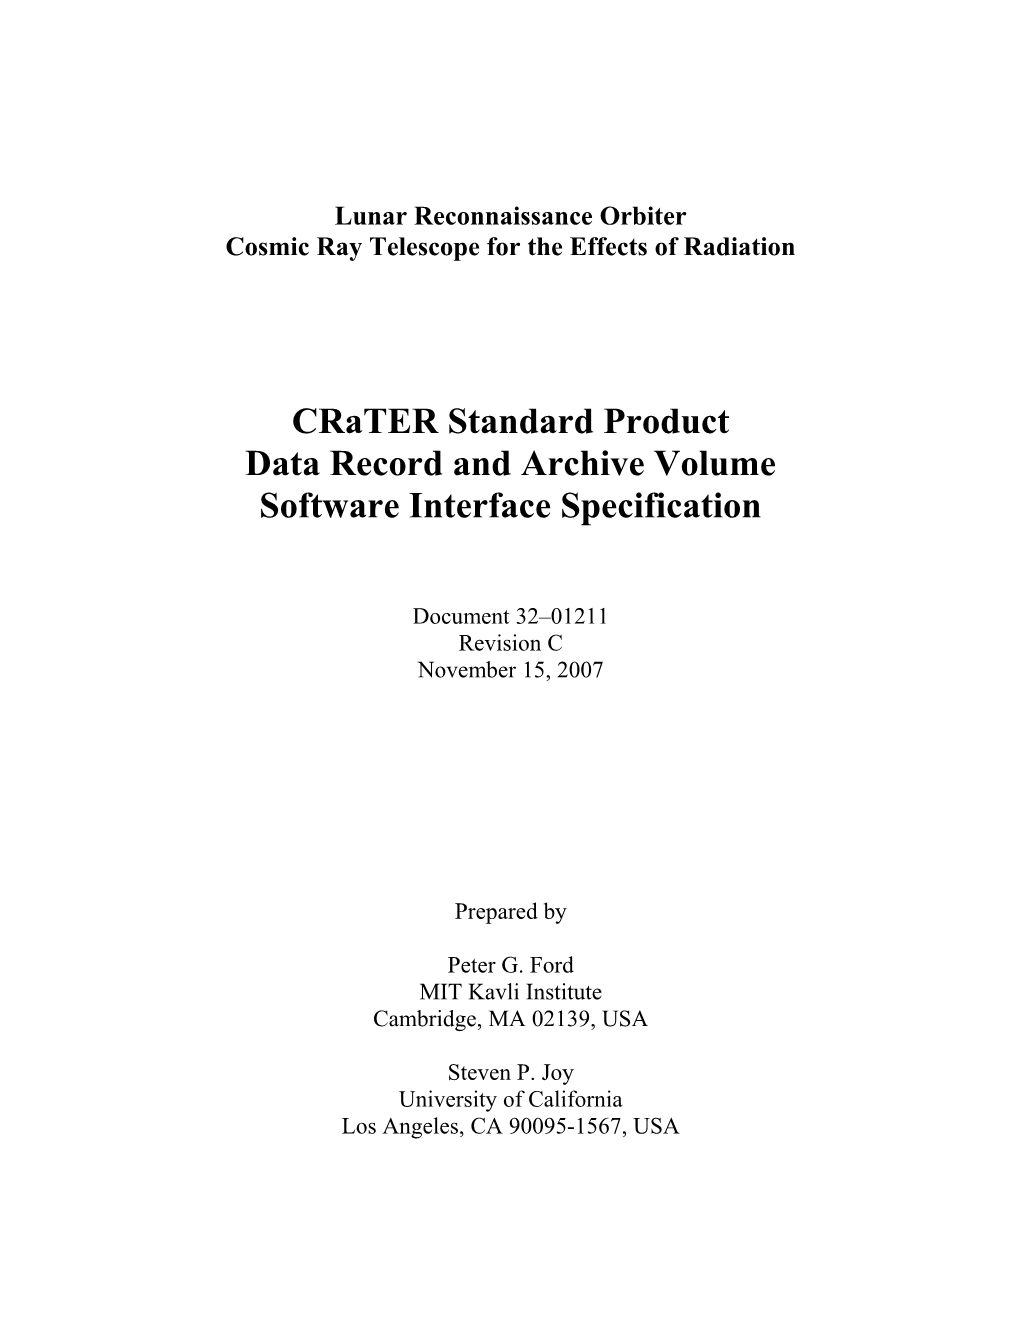 Crater Standard Product Data Record and Archive Volume Software Interface Specification